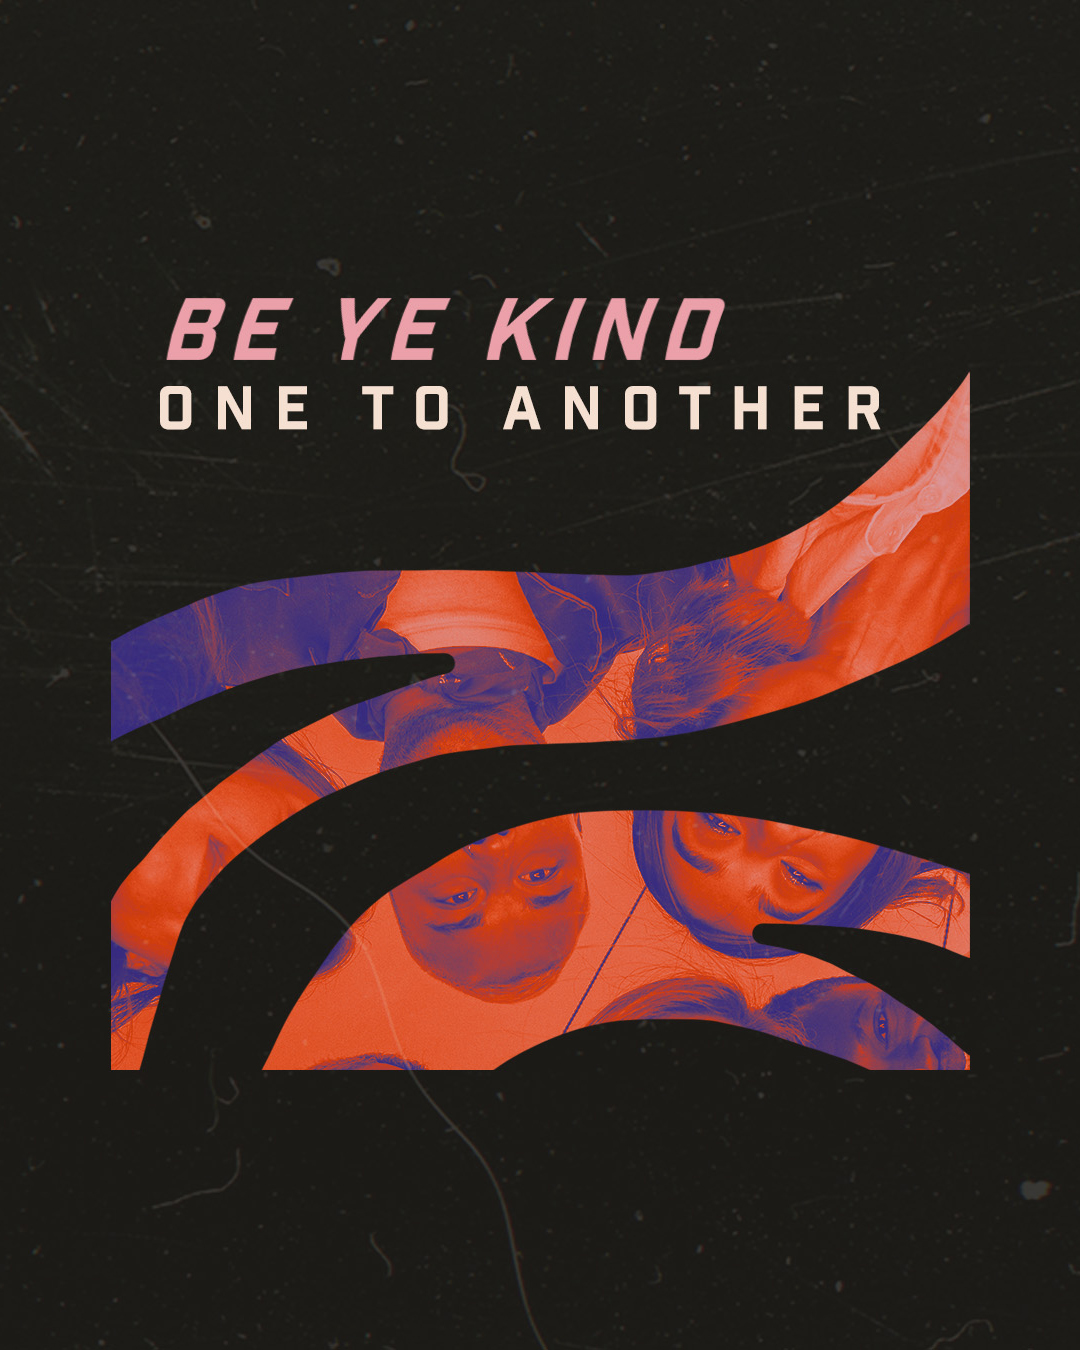 Be ye kind one to another